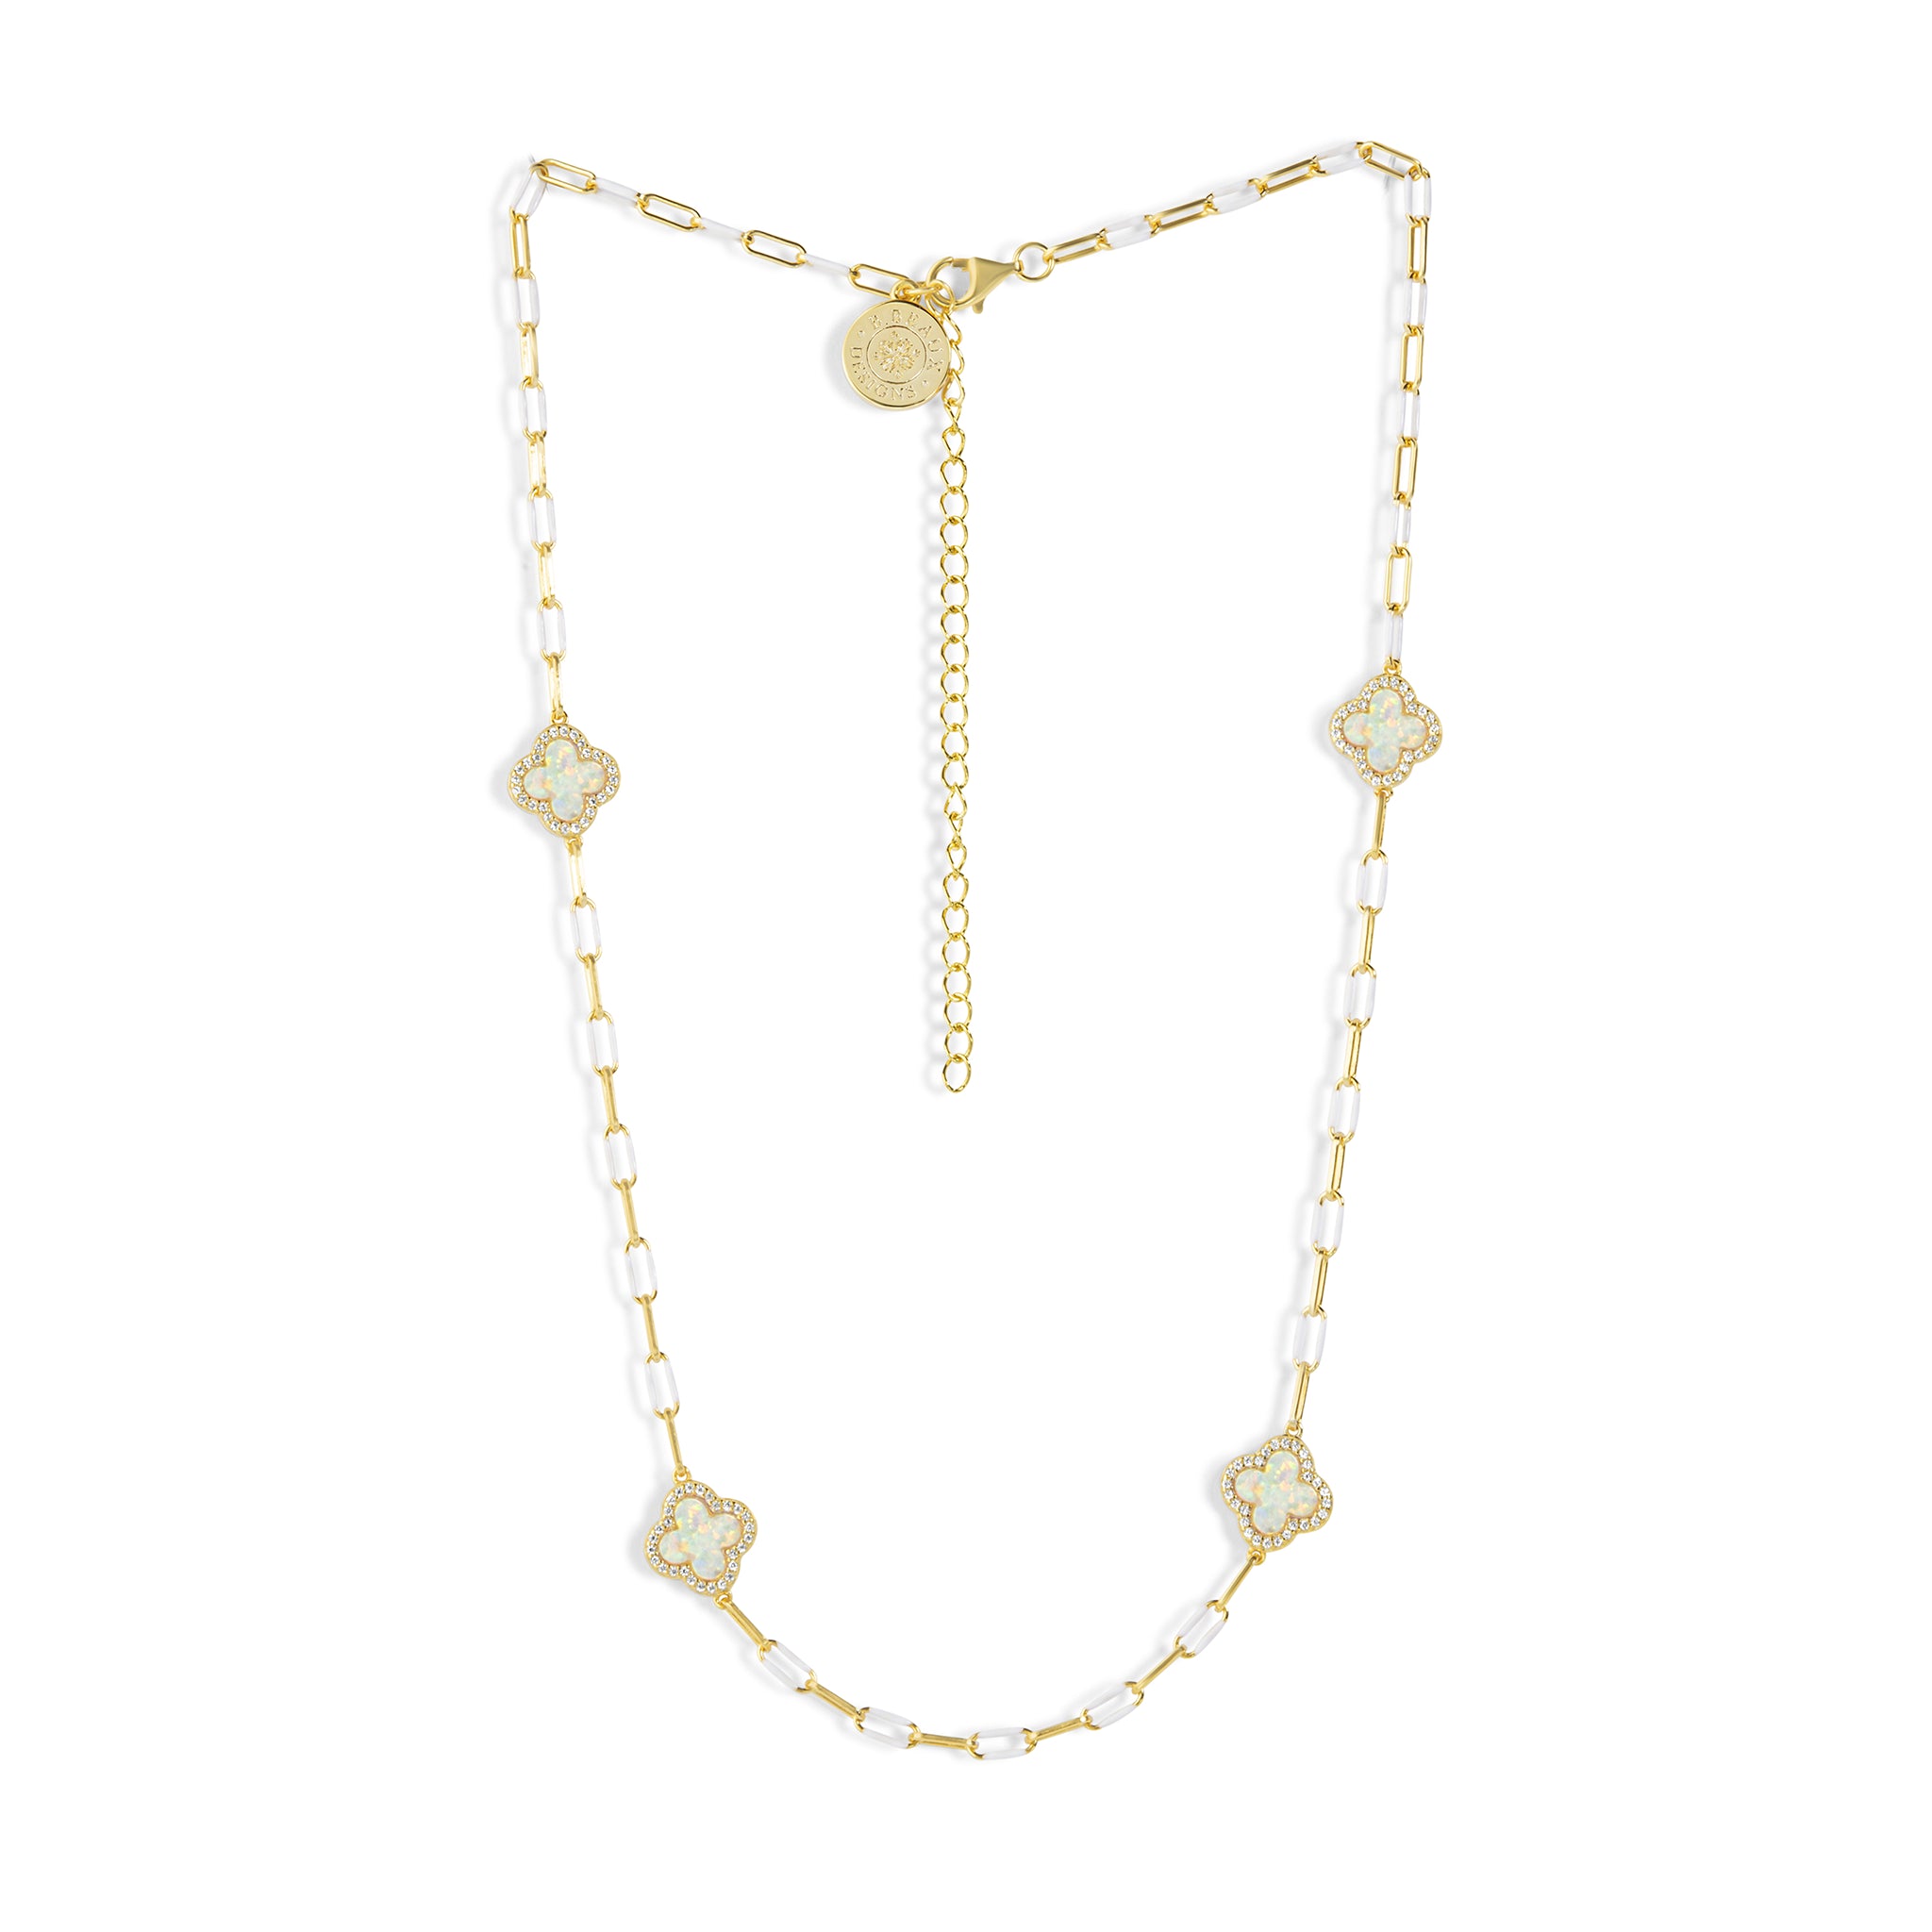 The coveted Cream Satin & Lira Clasp Necklace. Selling out fast